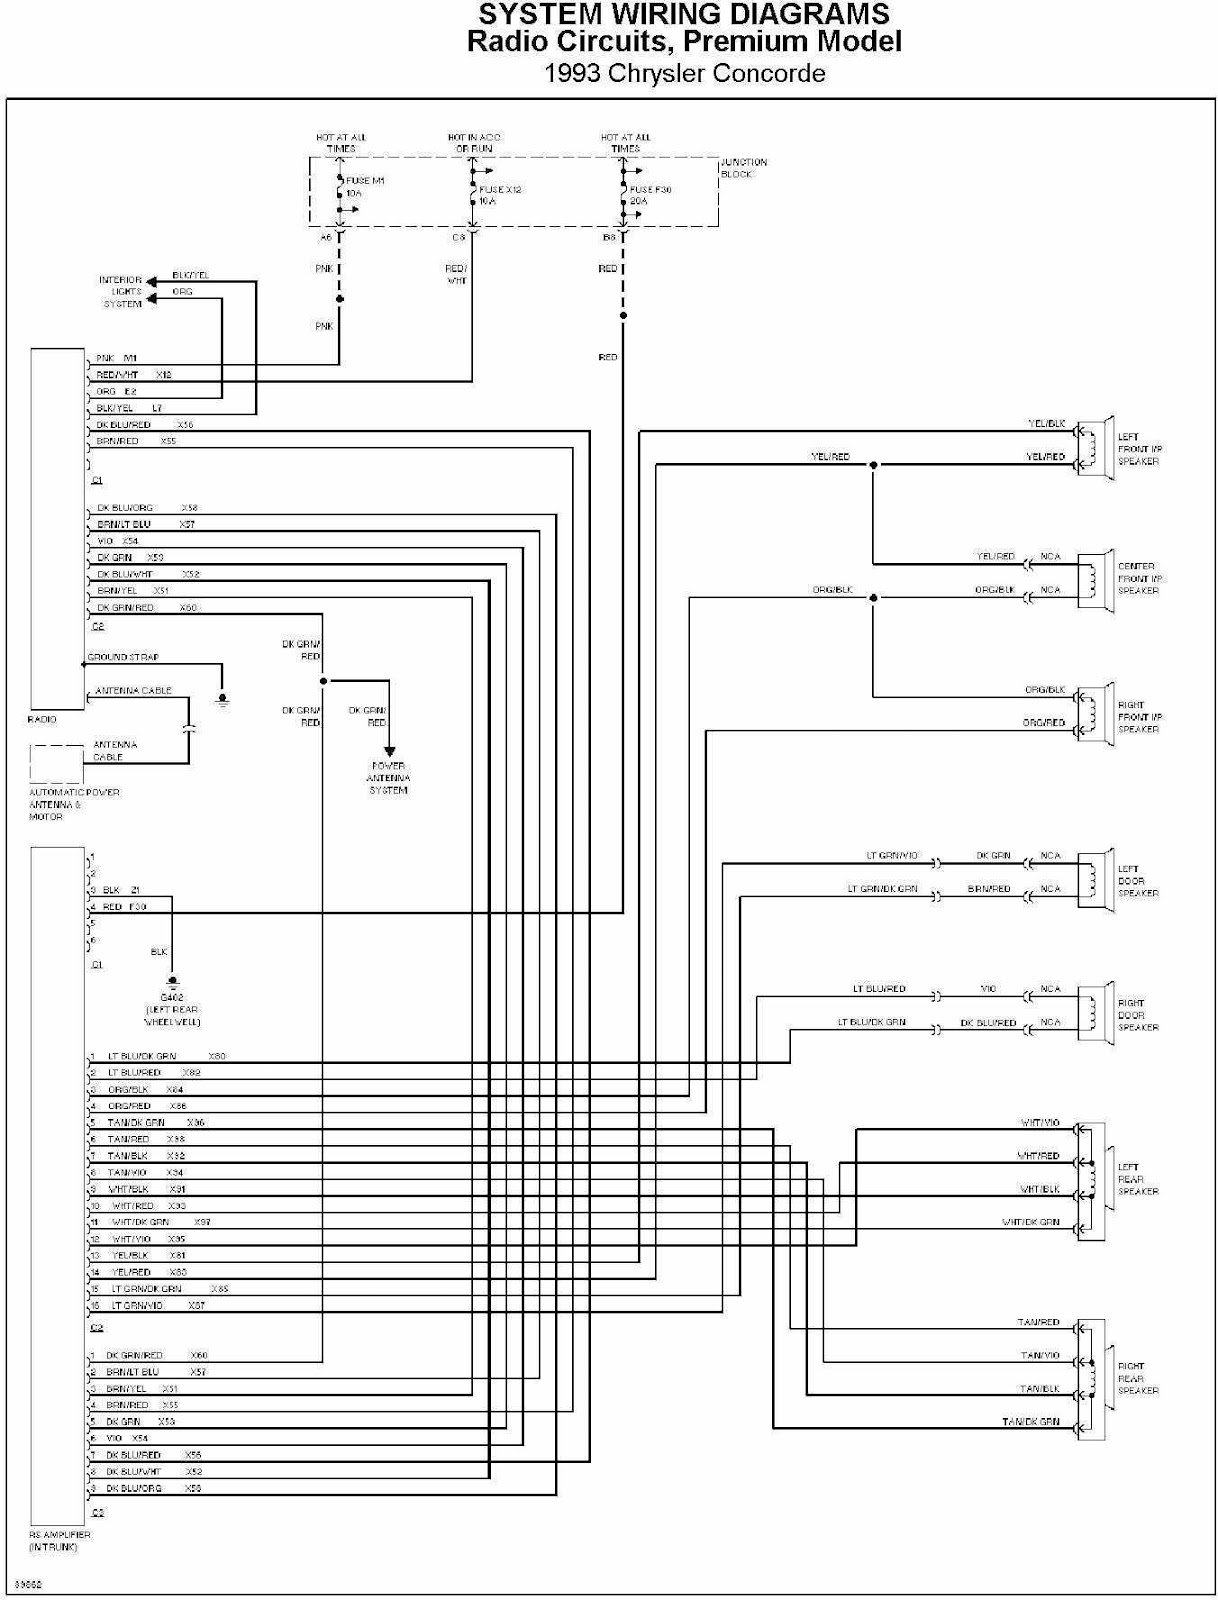 Chrysler Concorde 1993 Radio Circuit System Wiring Diagram | All about